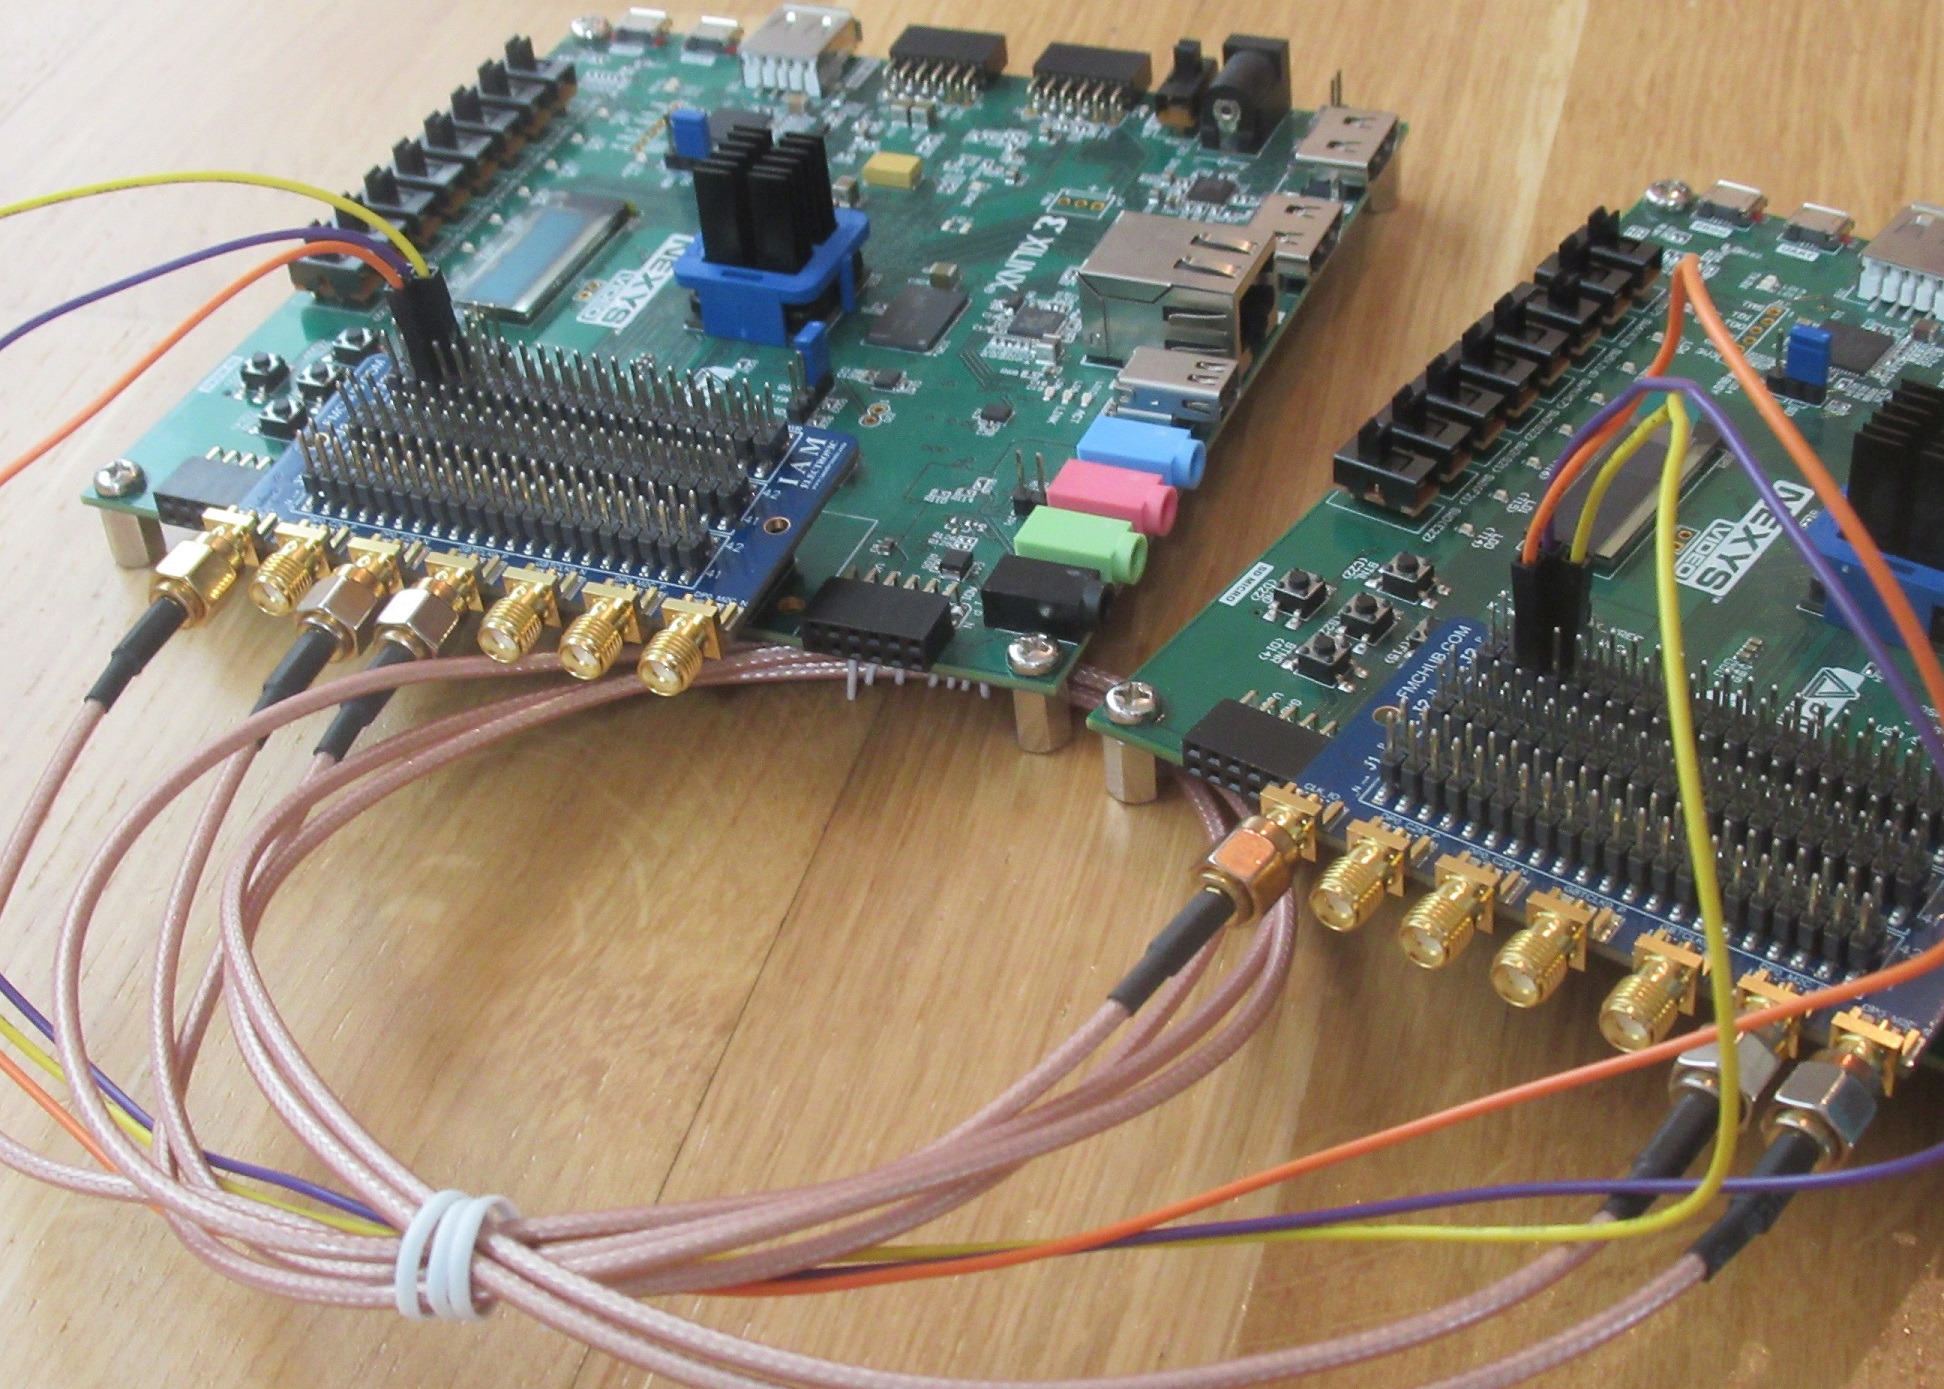 Board-to-board interconnection with the FMC LPC Pin Header Board